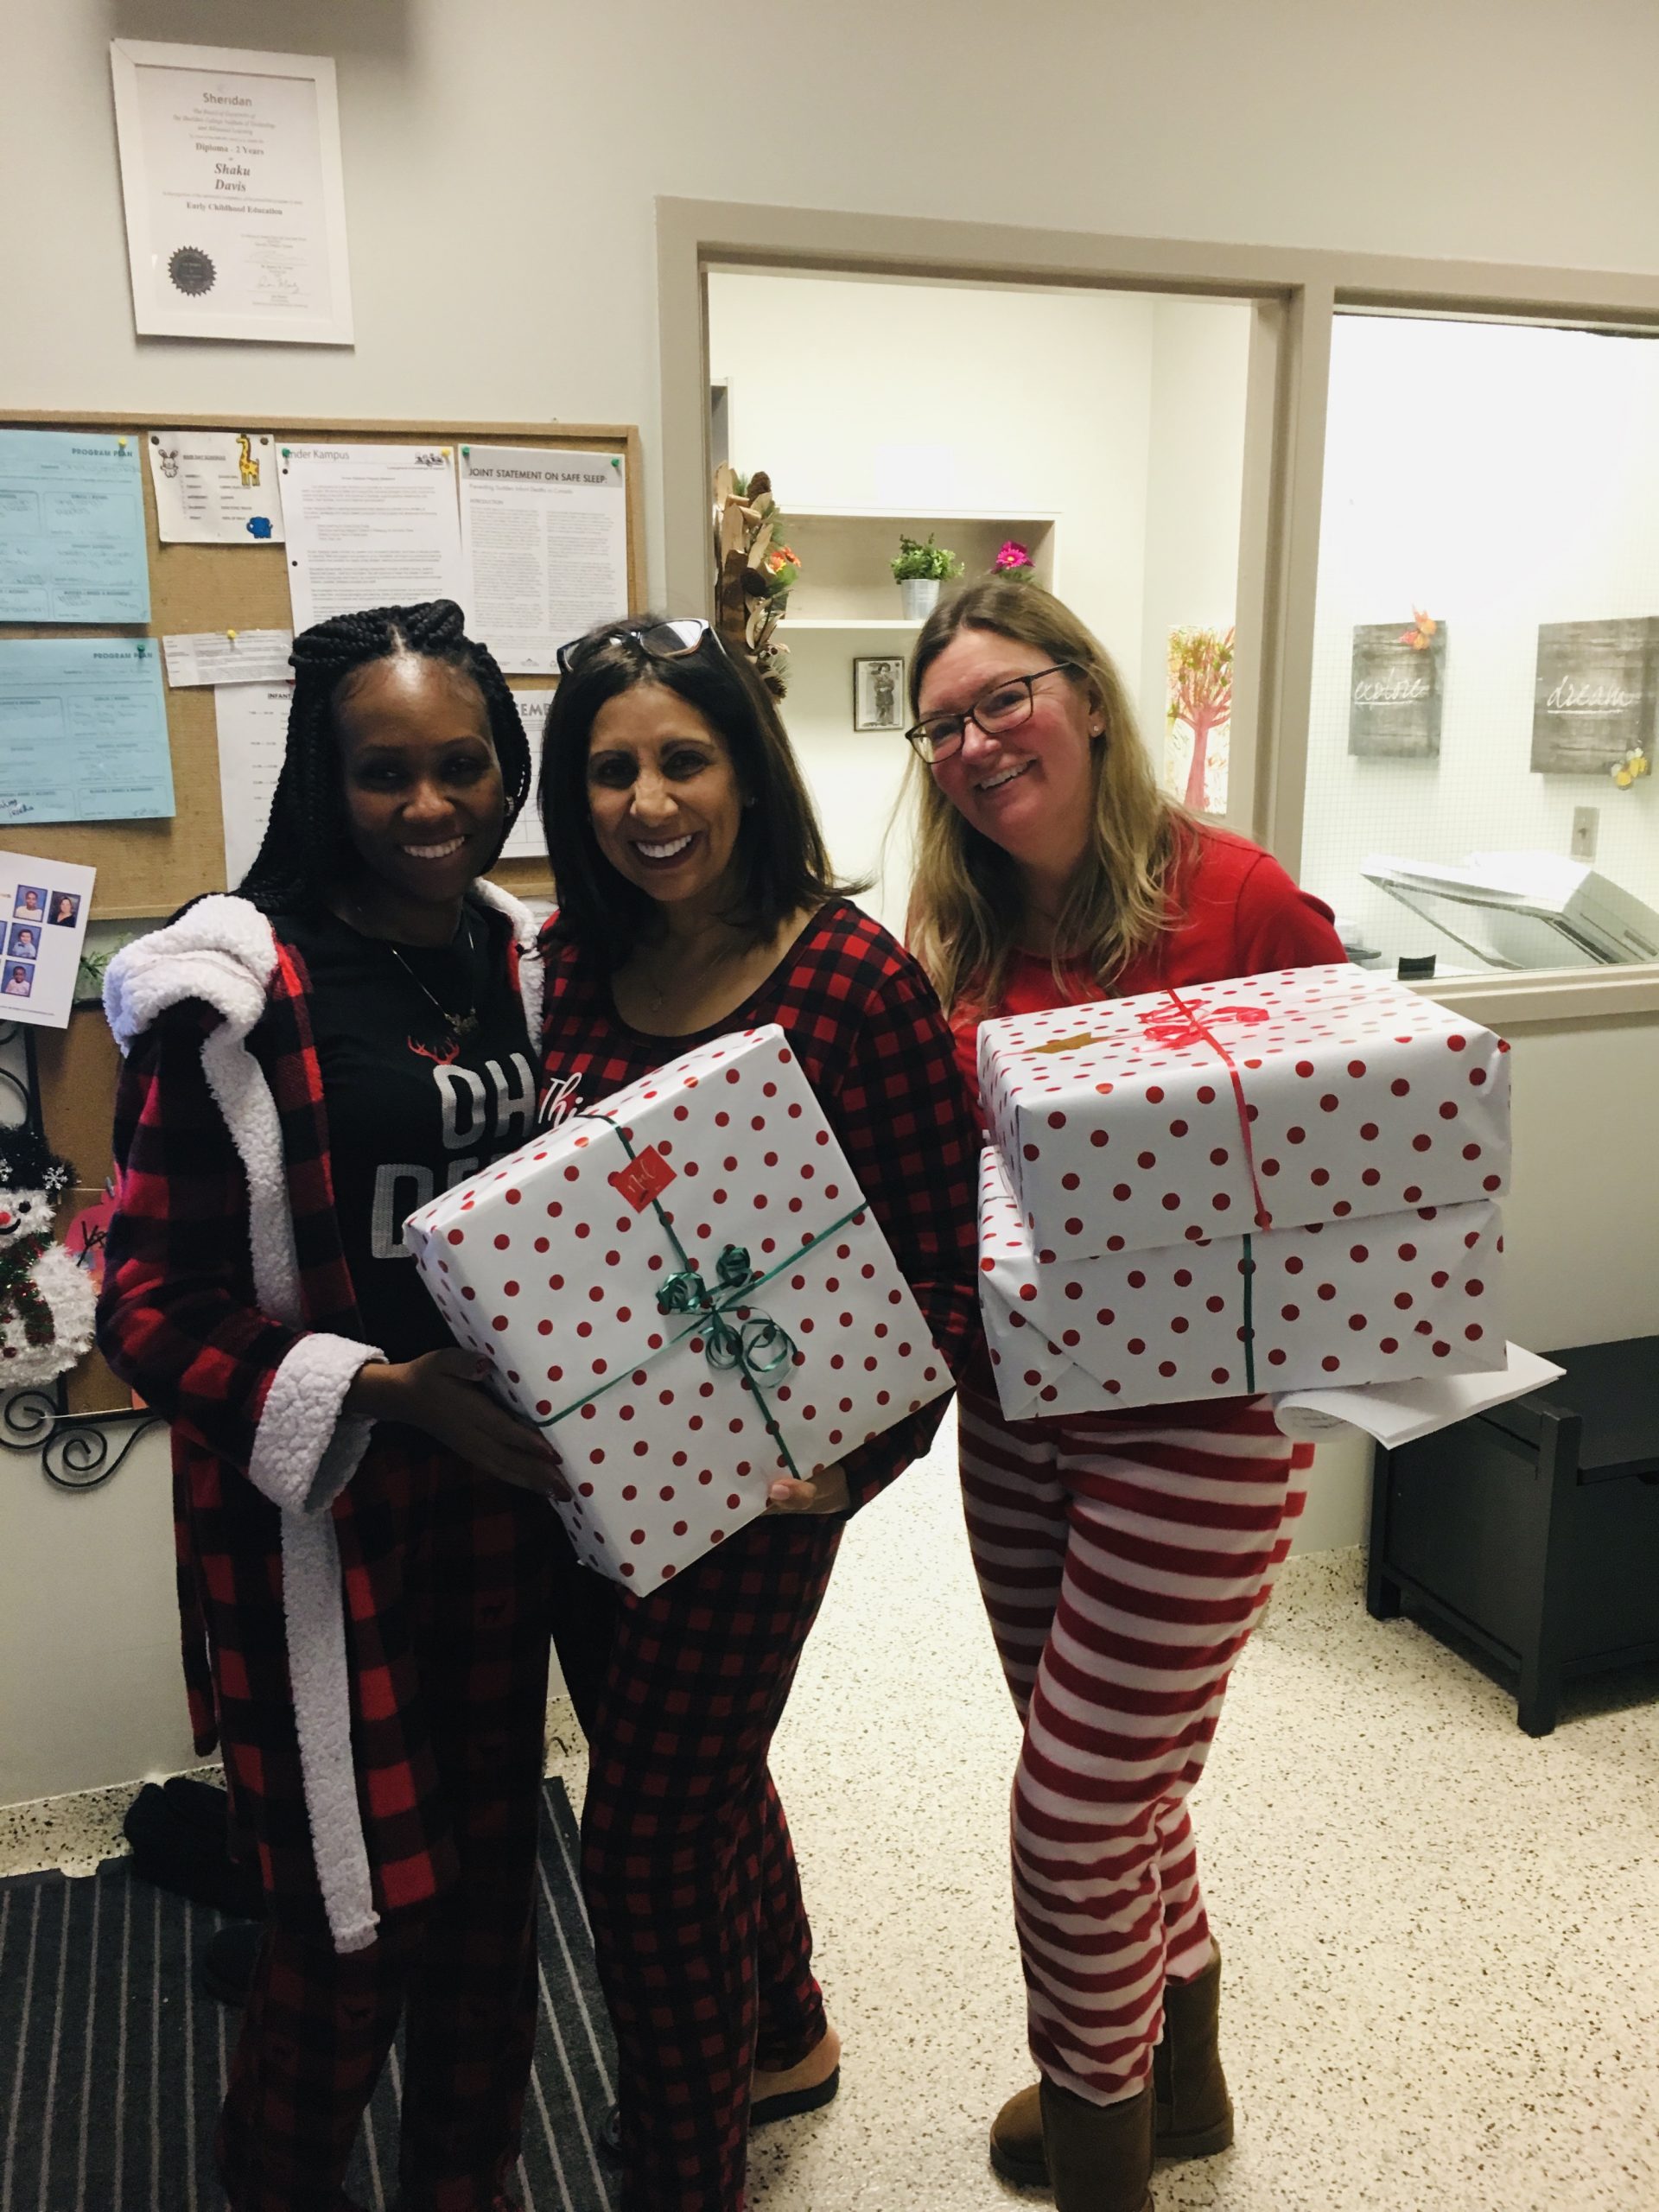 Kinder Kampus staff dressed in holiday outfits with presents